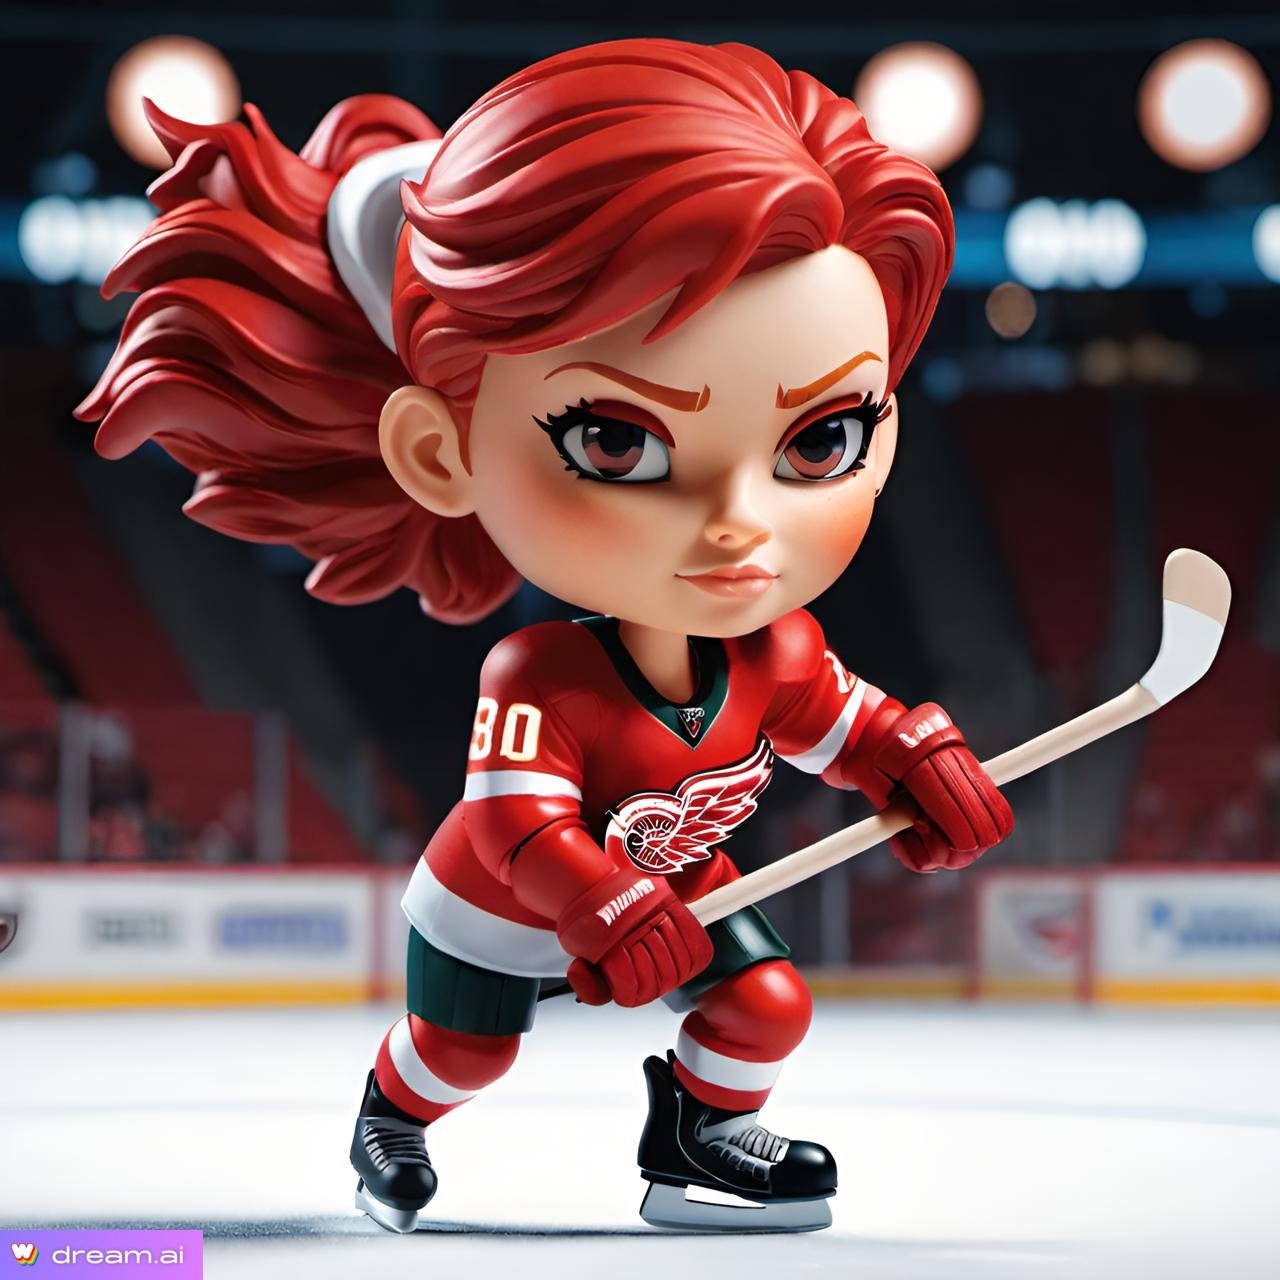 a toy figure of a hockey player